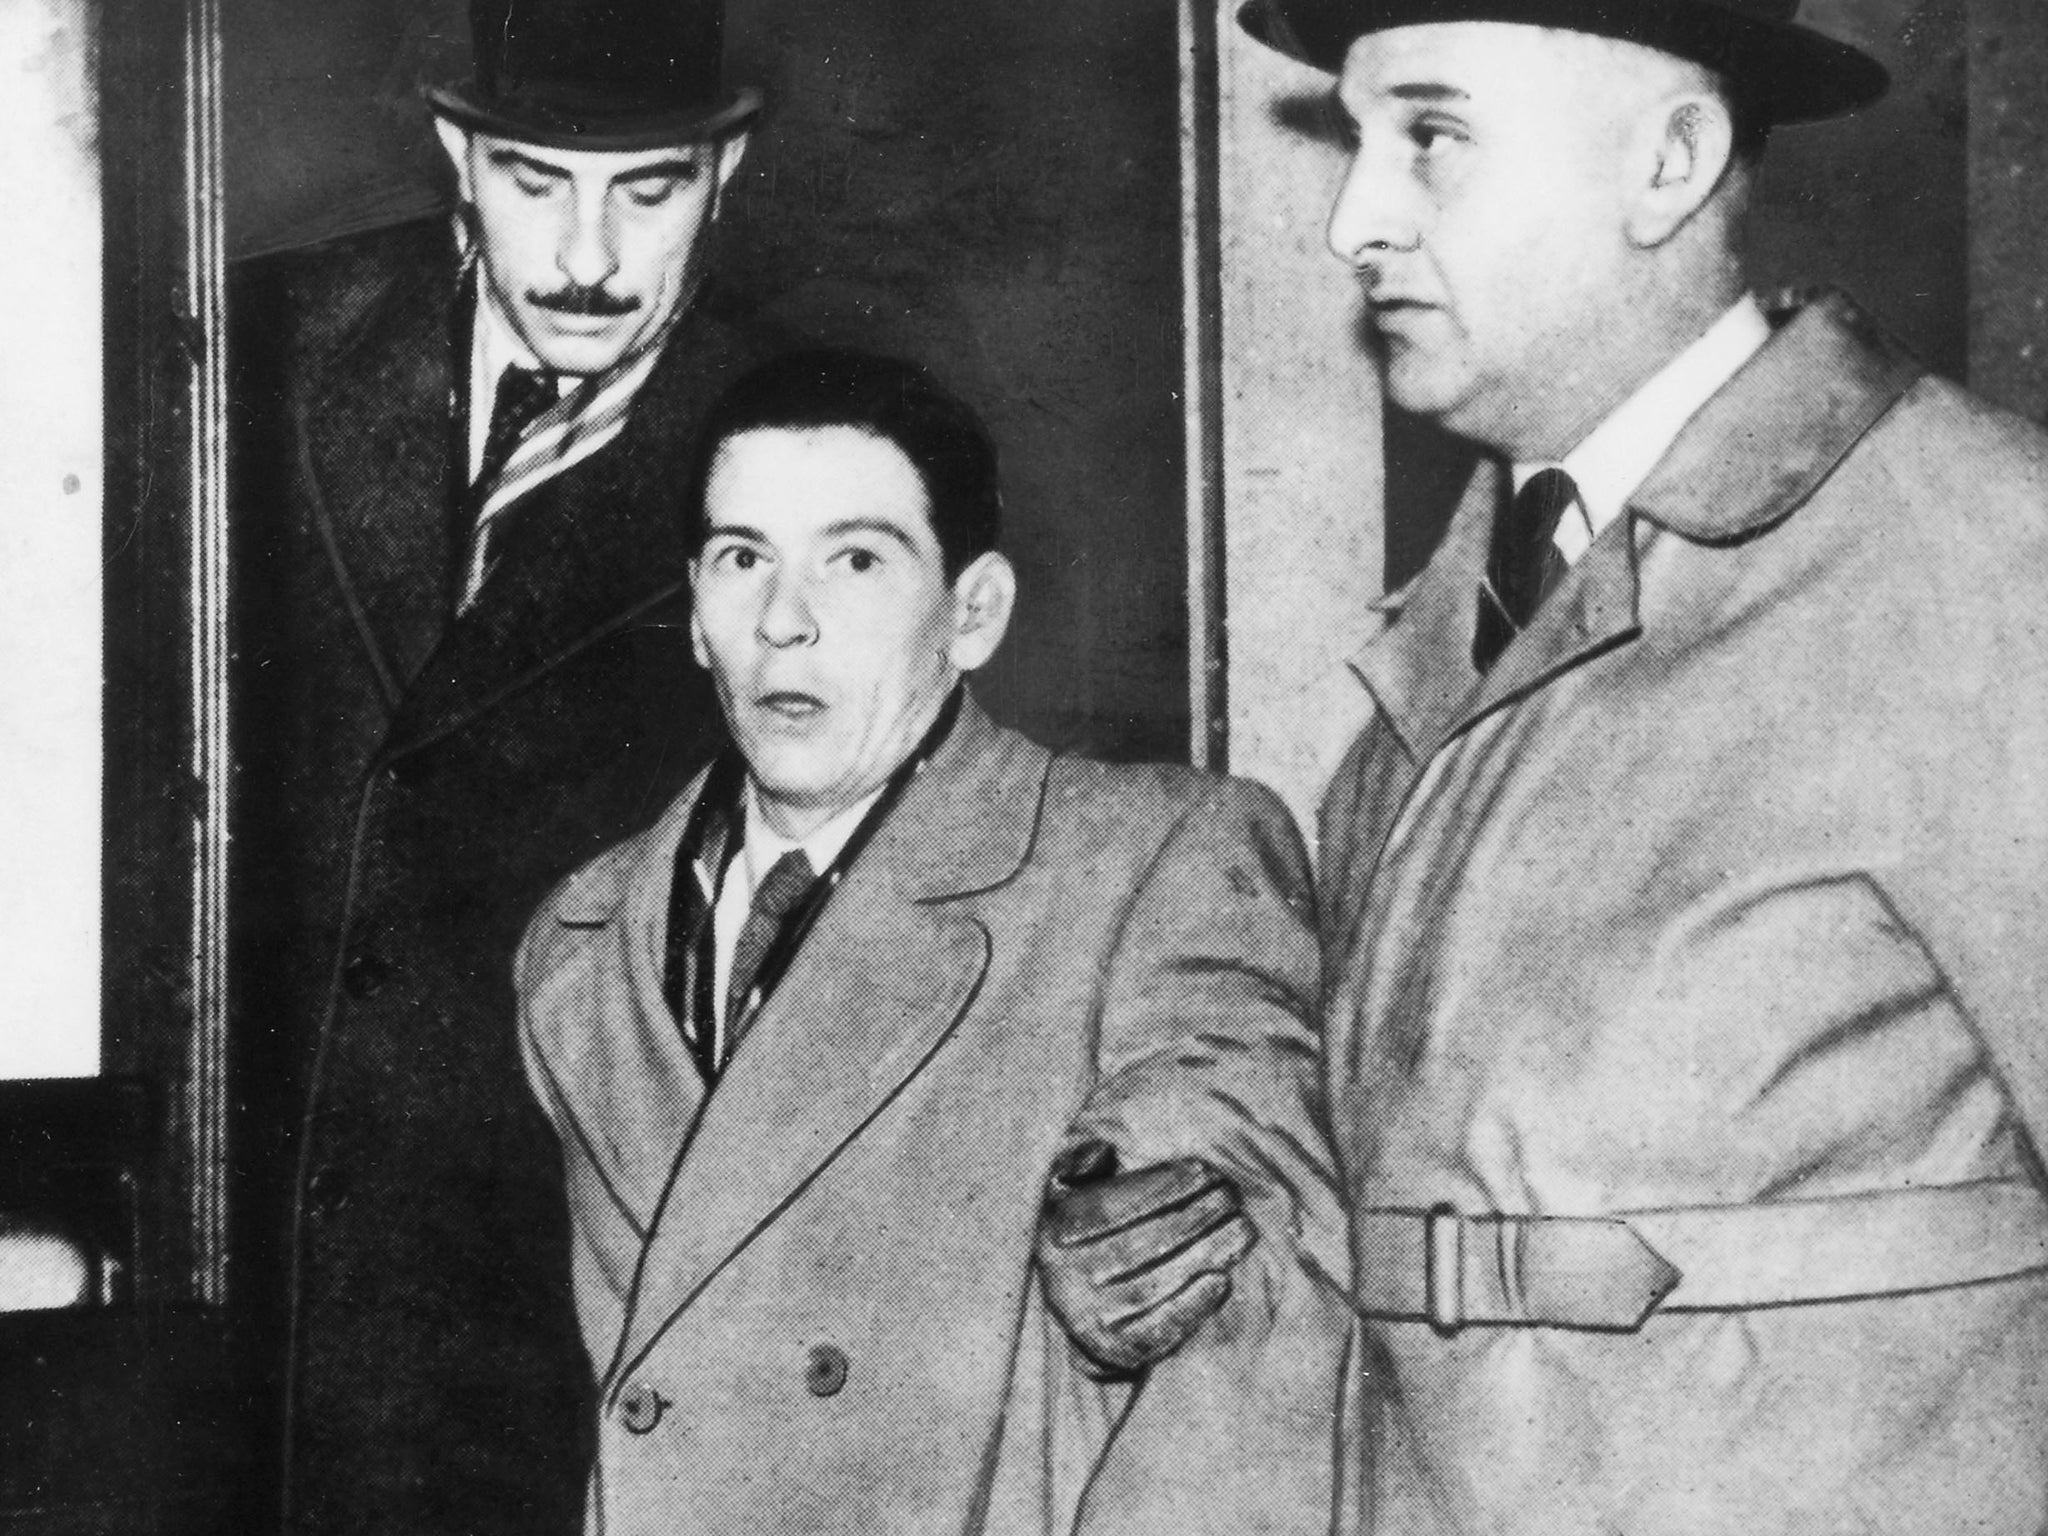 Terrified face of a doomed innocent: in one of the most infamous miscarriages of justice in British legal history, Timothy Evans was convicted of the murder of his wife and daughter, and in 1950 hanged. His neighbour later confessed to the killings